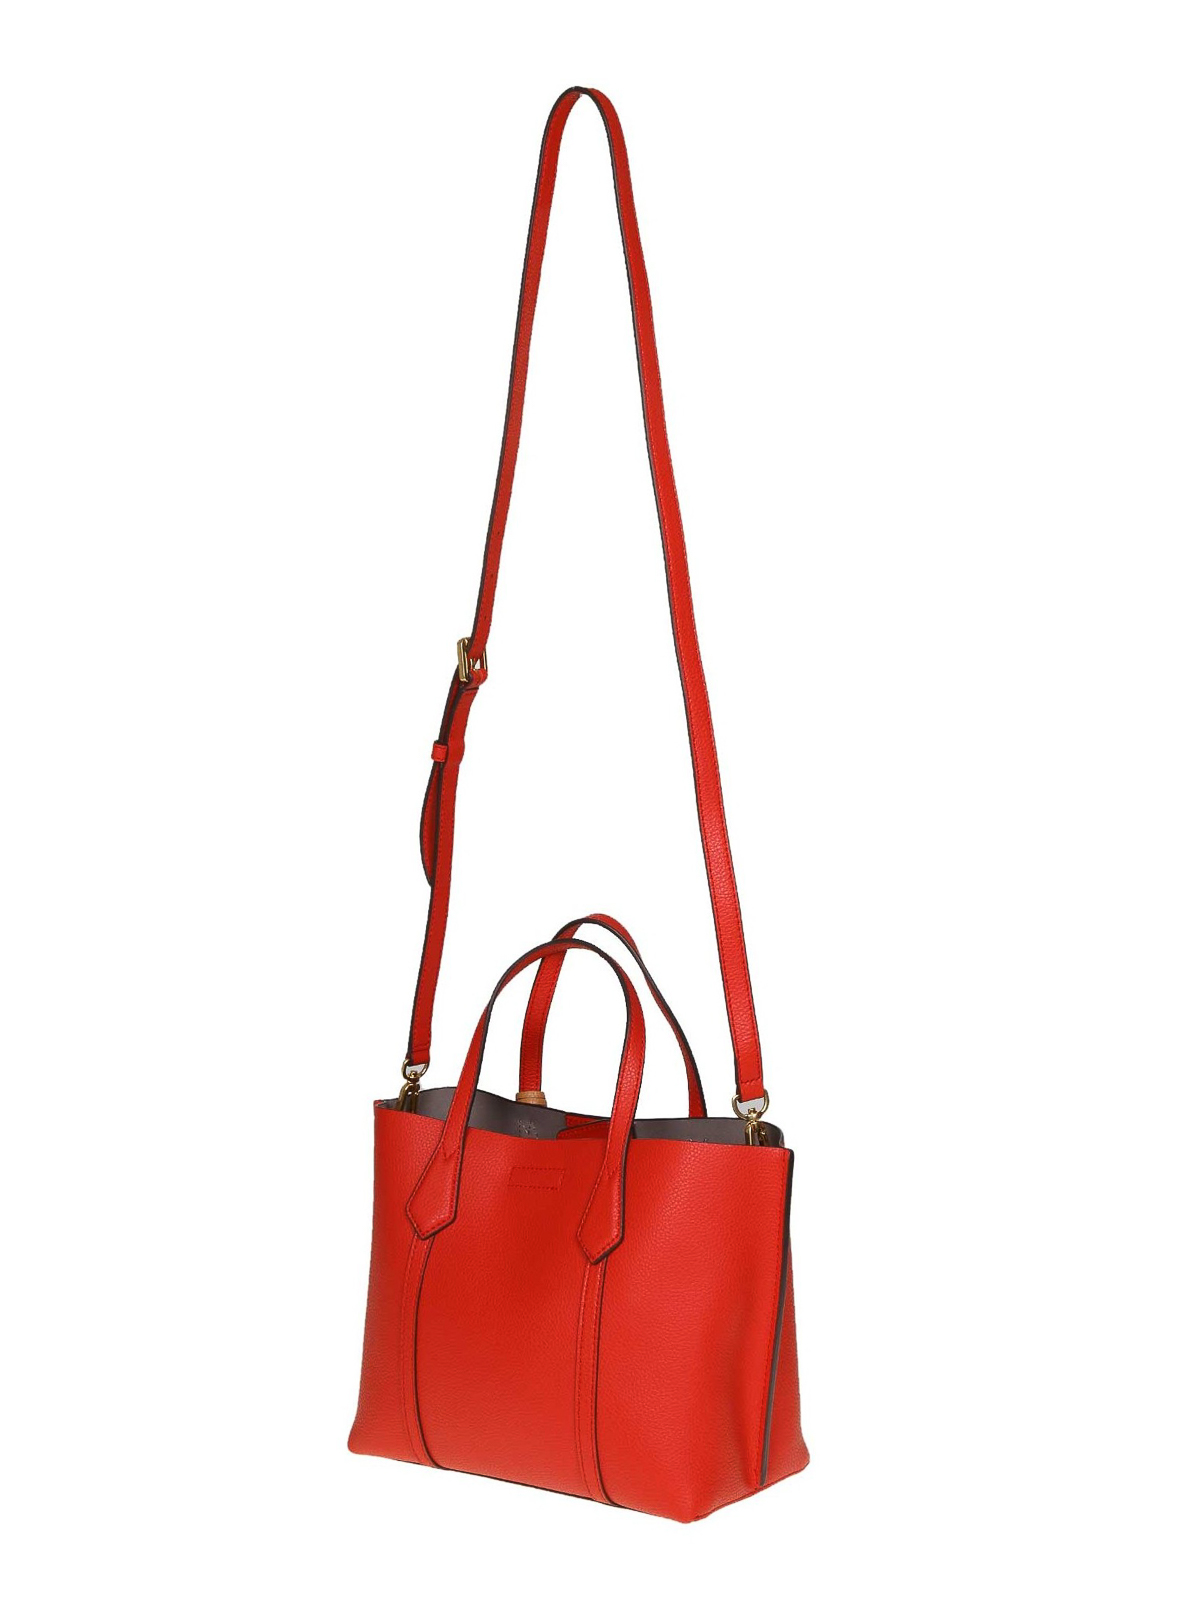 Totes bags Tory Burch - Perry red leather small tote - 56249612